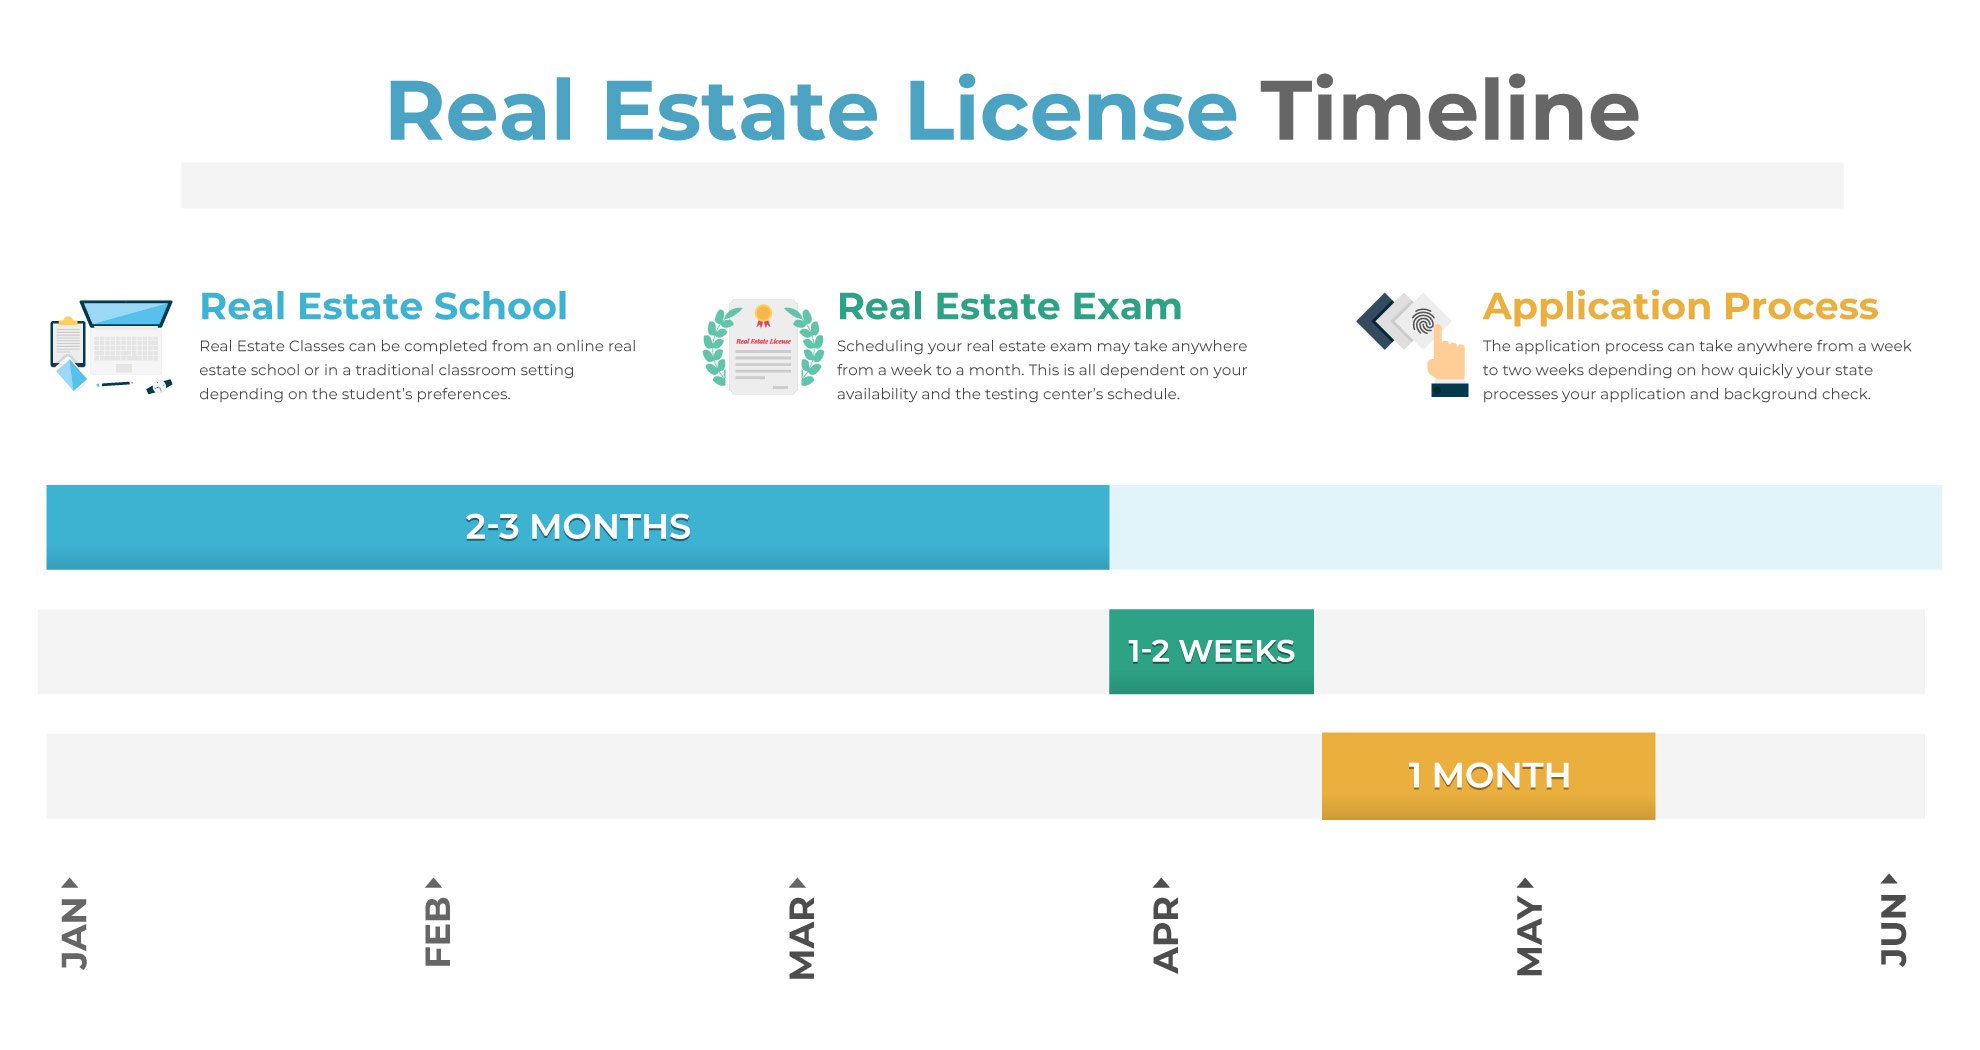 How Long Does It Take to Get a Real Estate License?